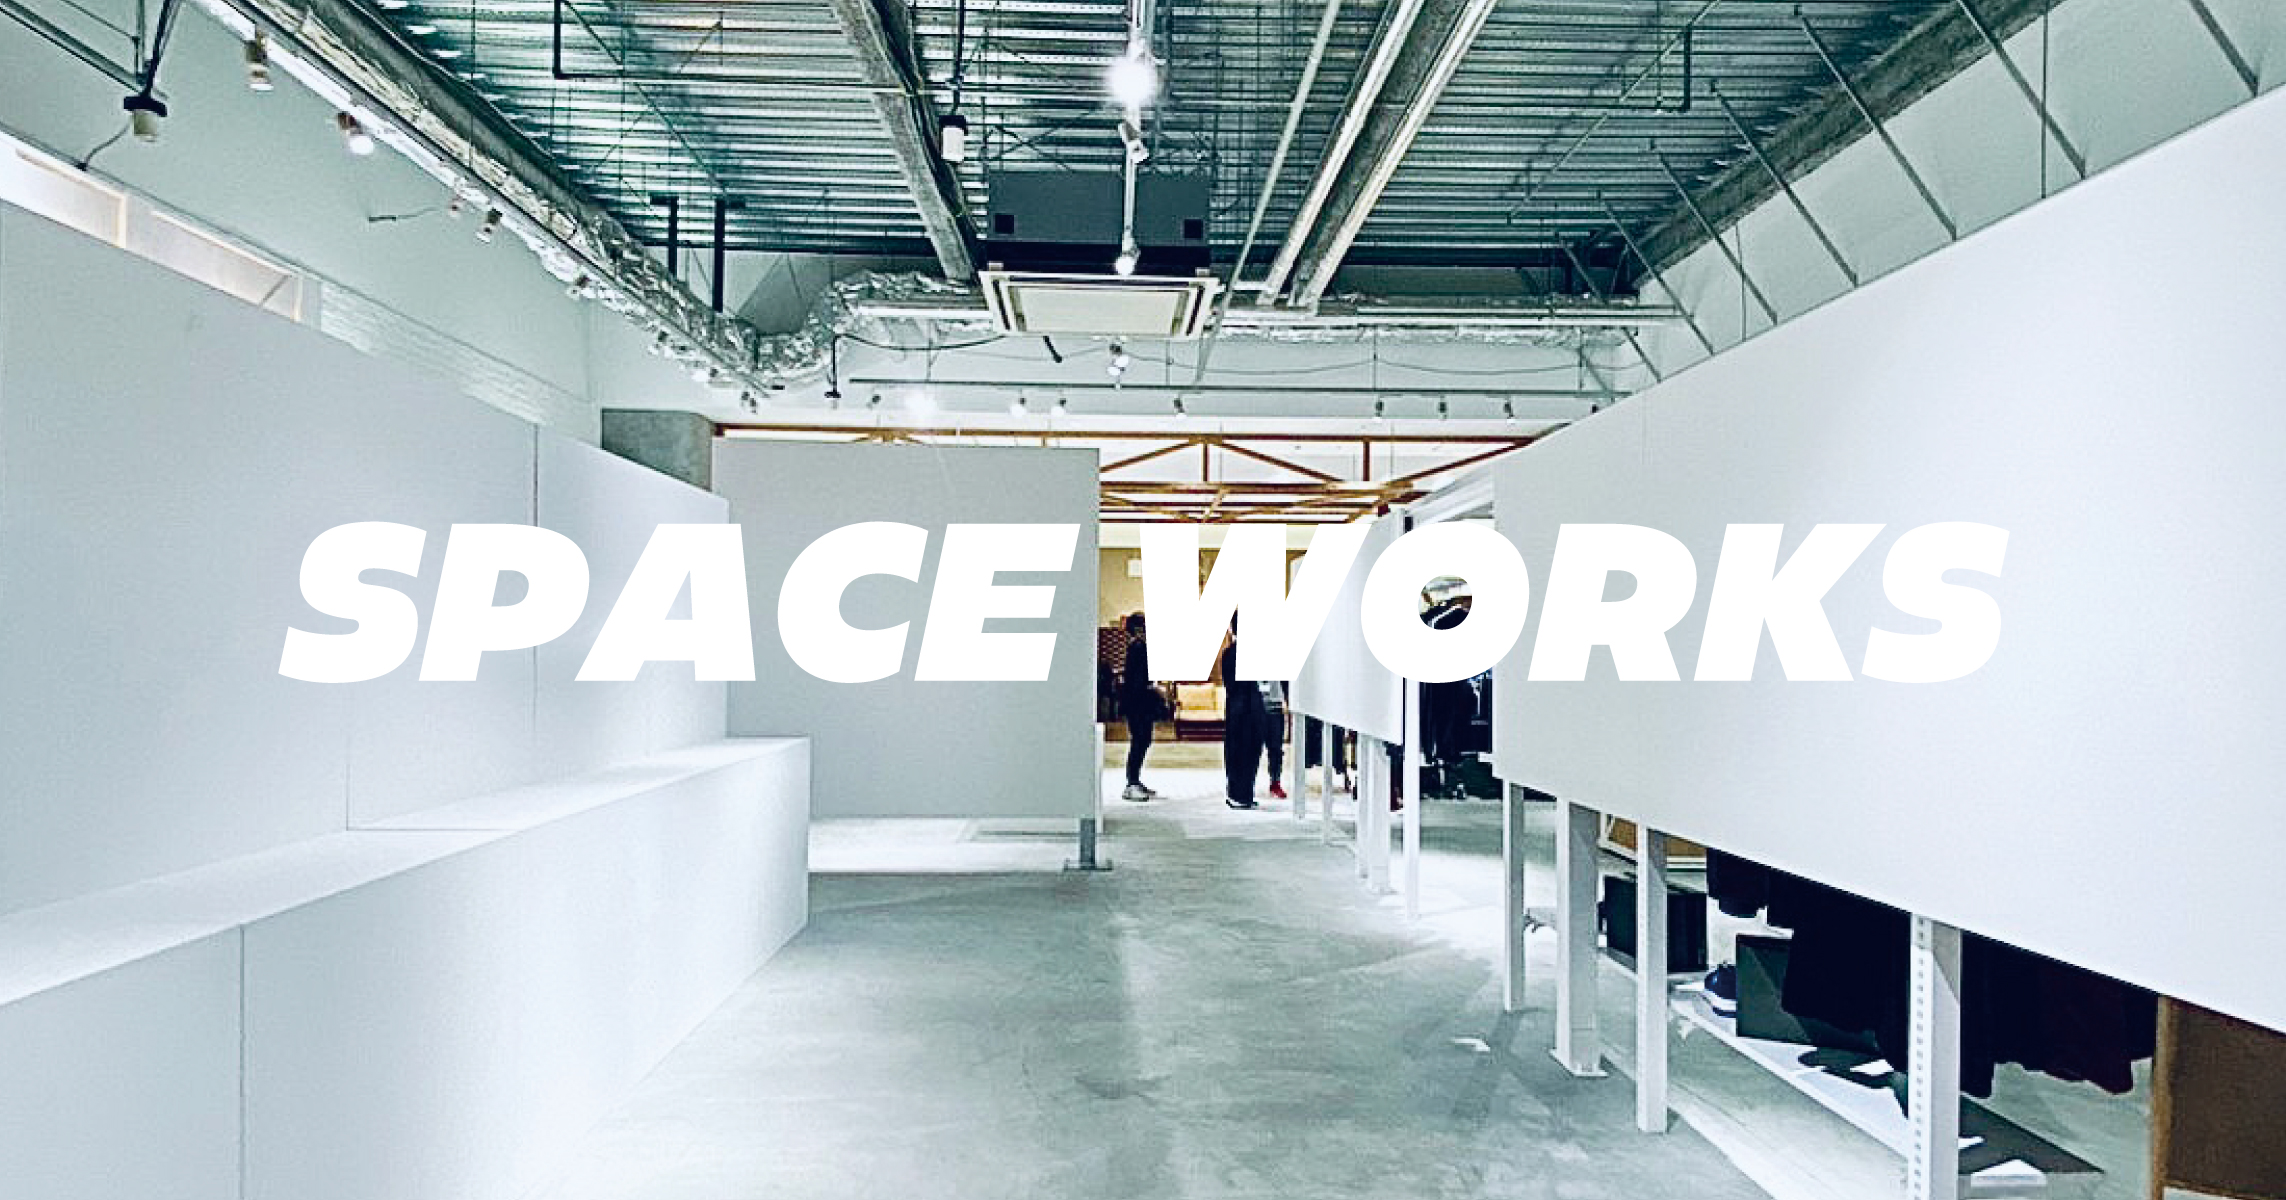 SPACE WORKS